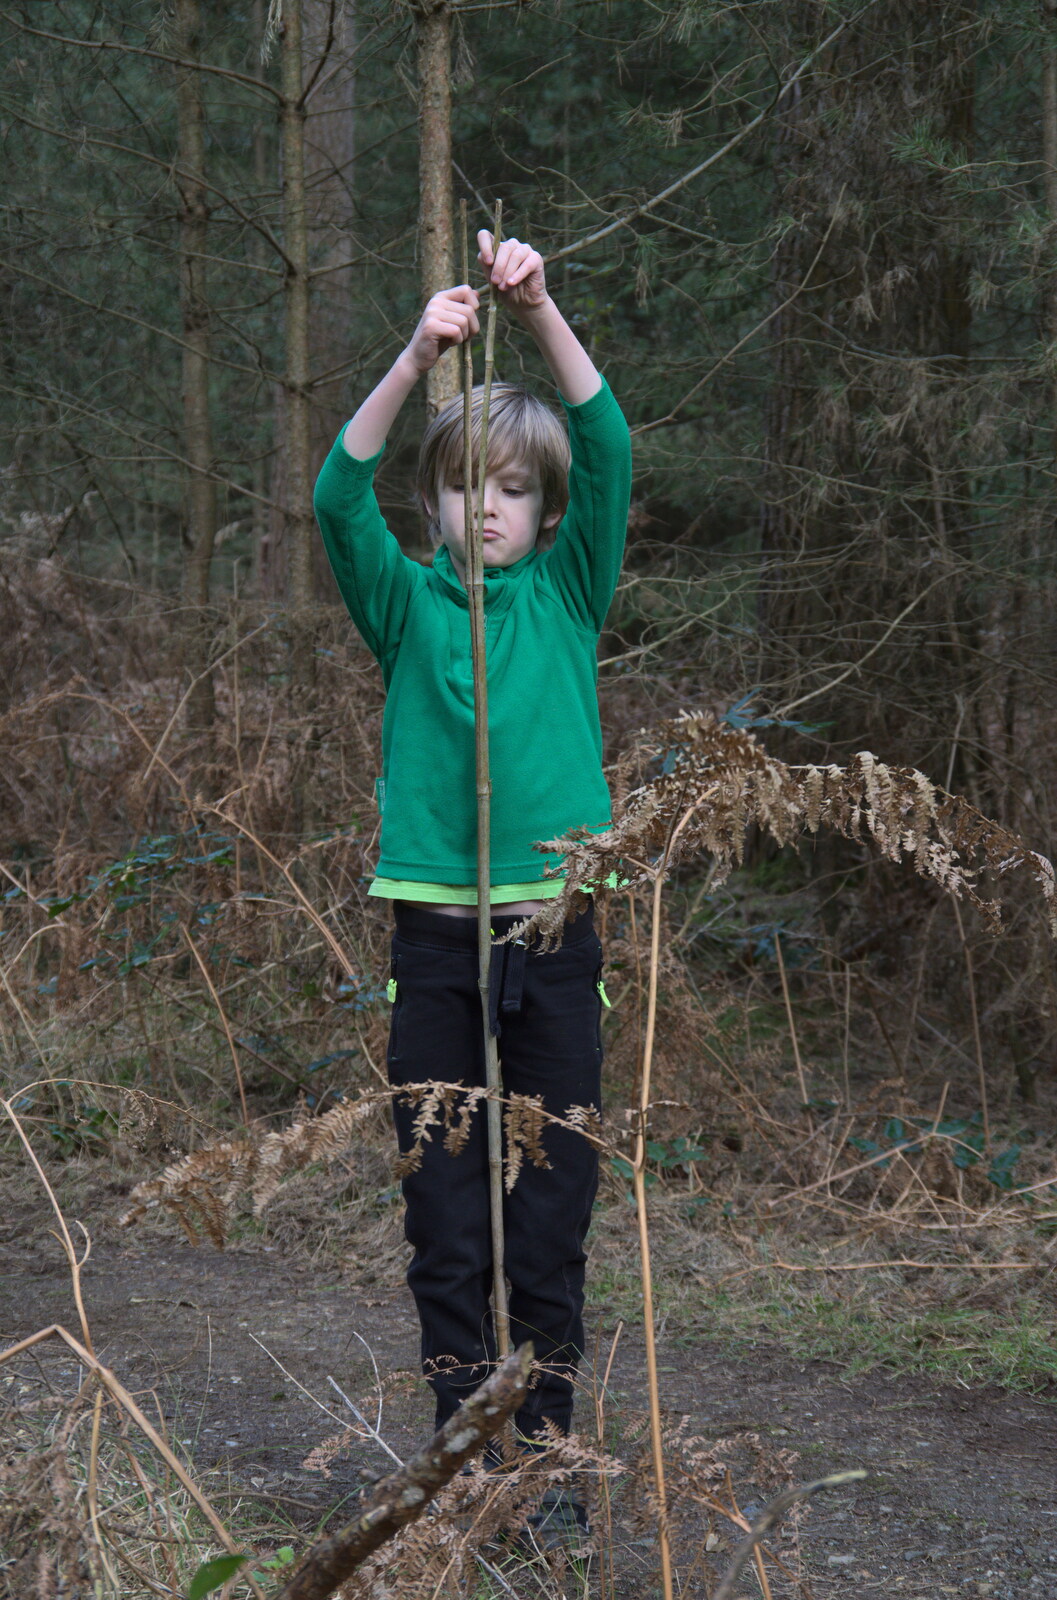 Thwacking things with a stick eventually breaks it from A Trip to High Lodge, Brandon, Suffolk - 7th March 2020